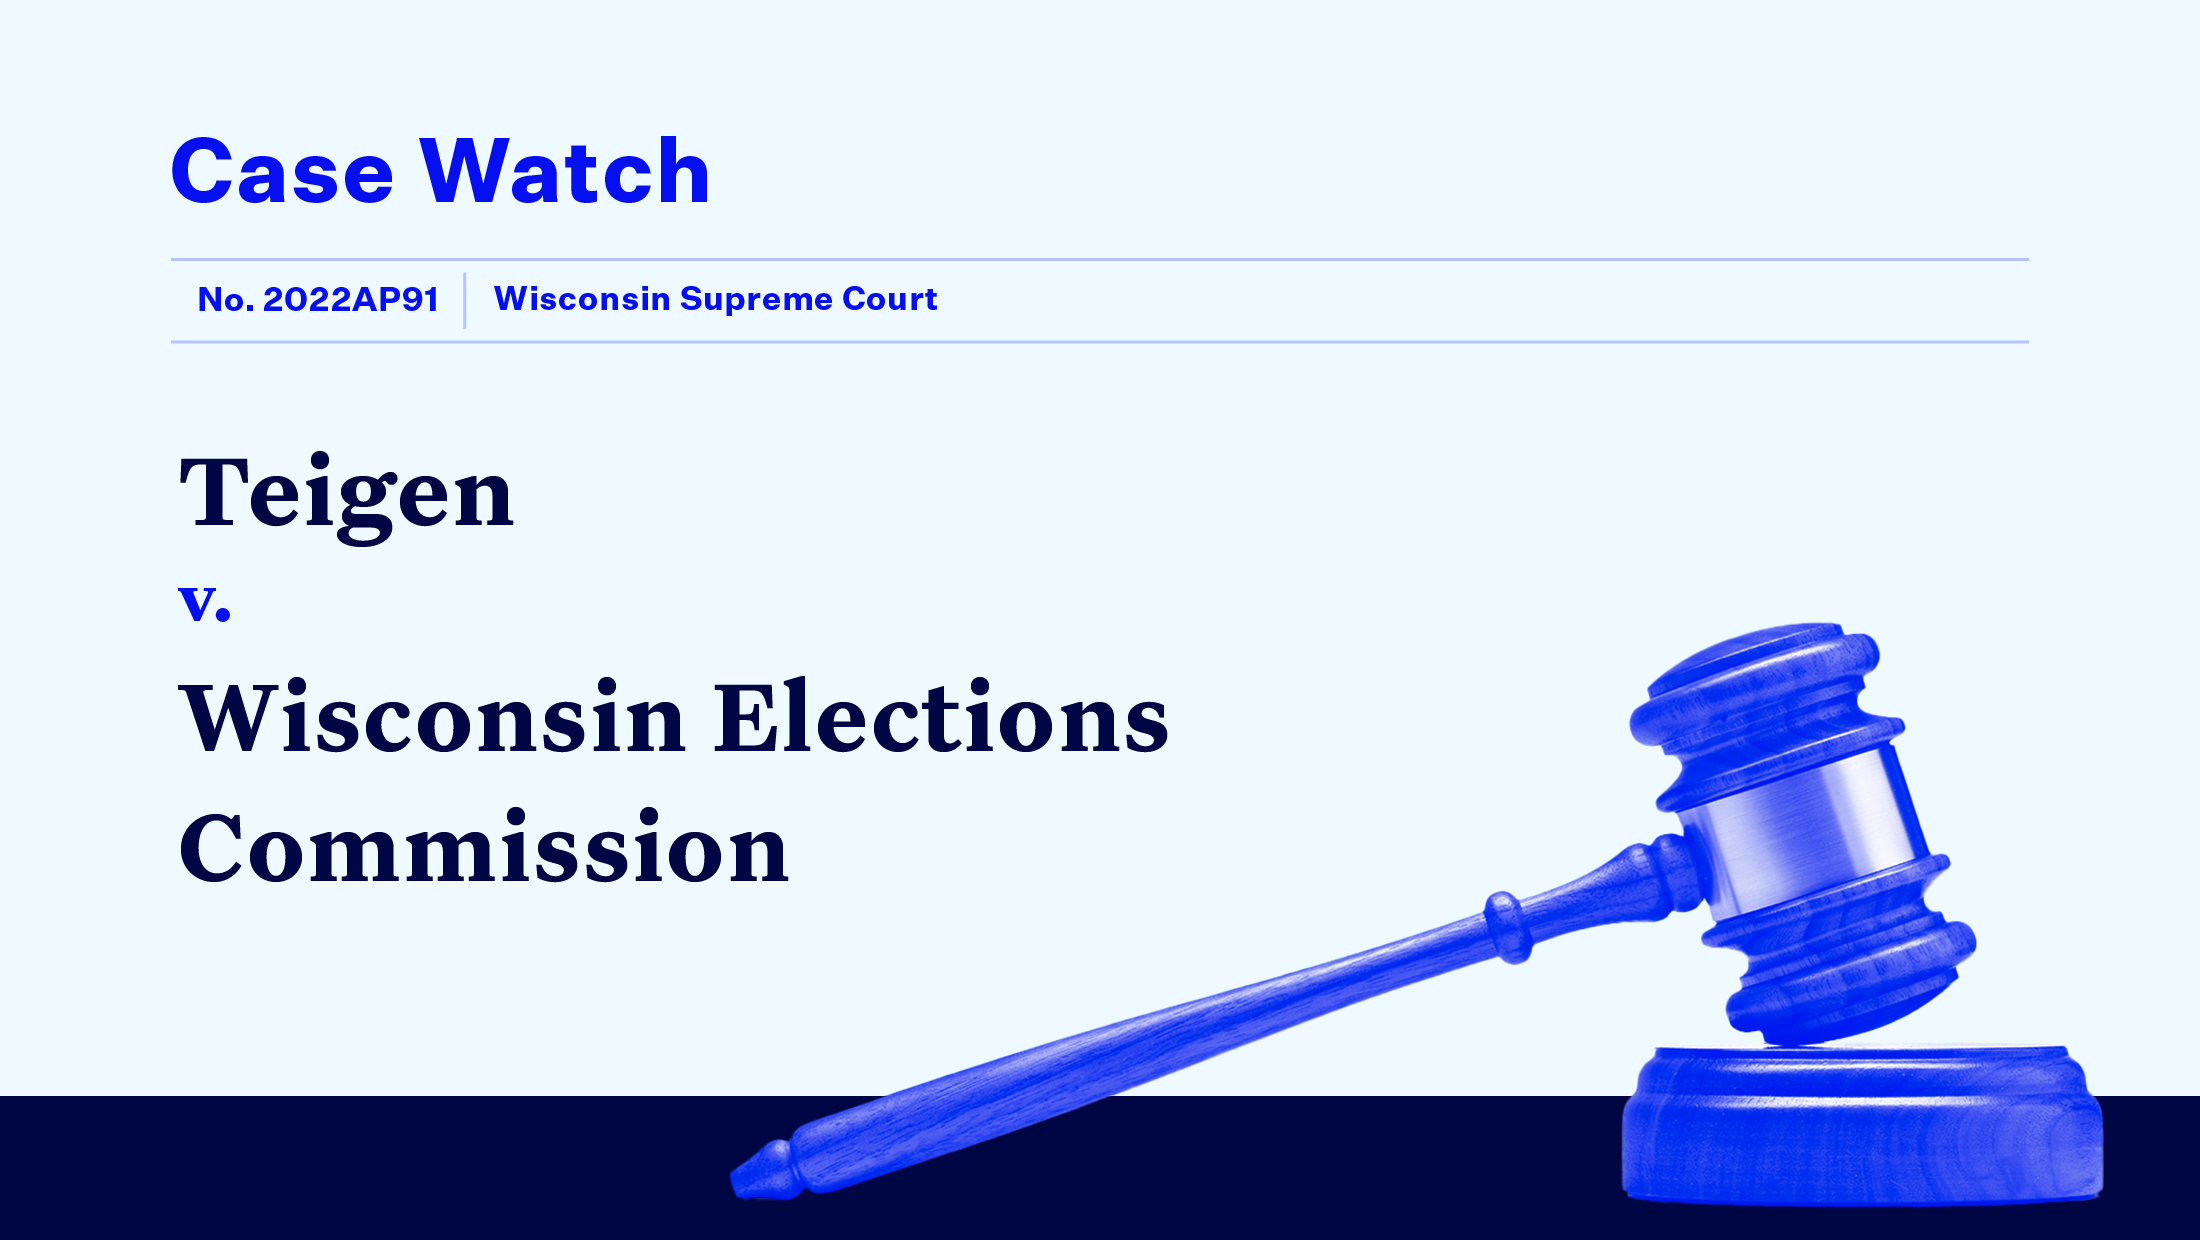 "CASE WATCH Teigan v. Wisconsin Elections Commission" and other case-specific text, including the file number and court name, with a blue-tinted gavel